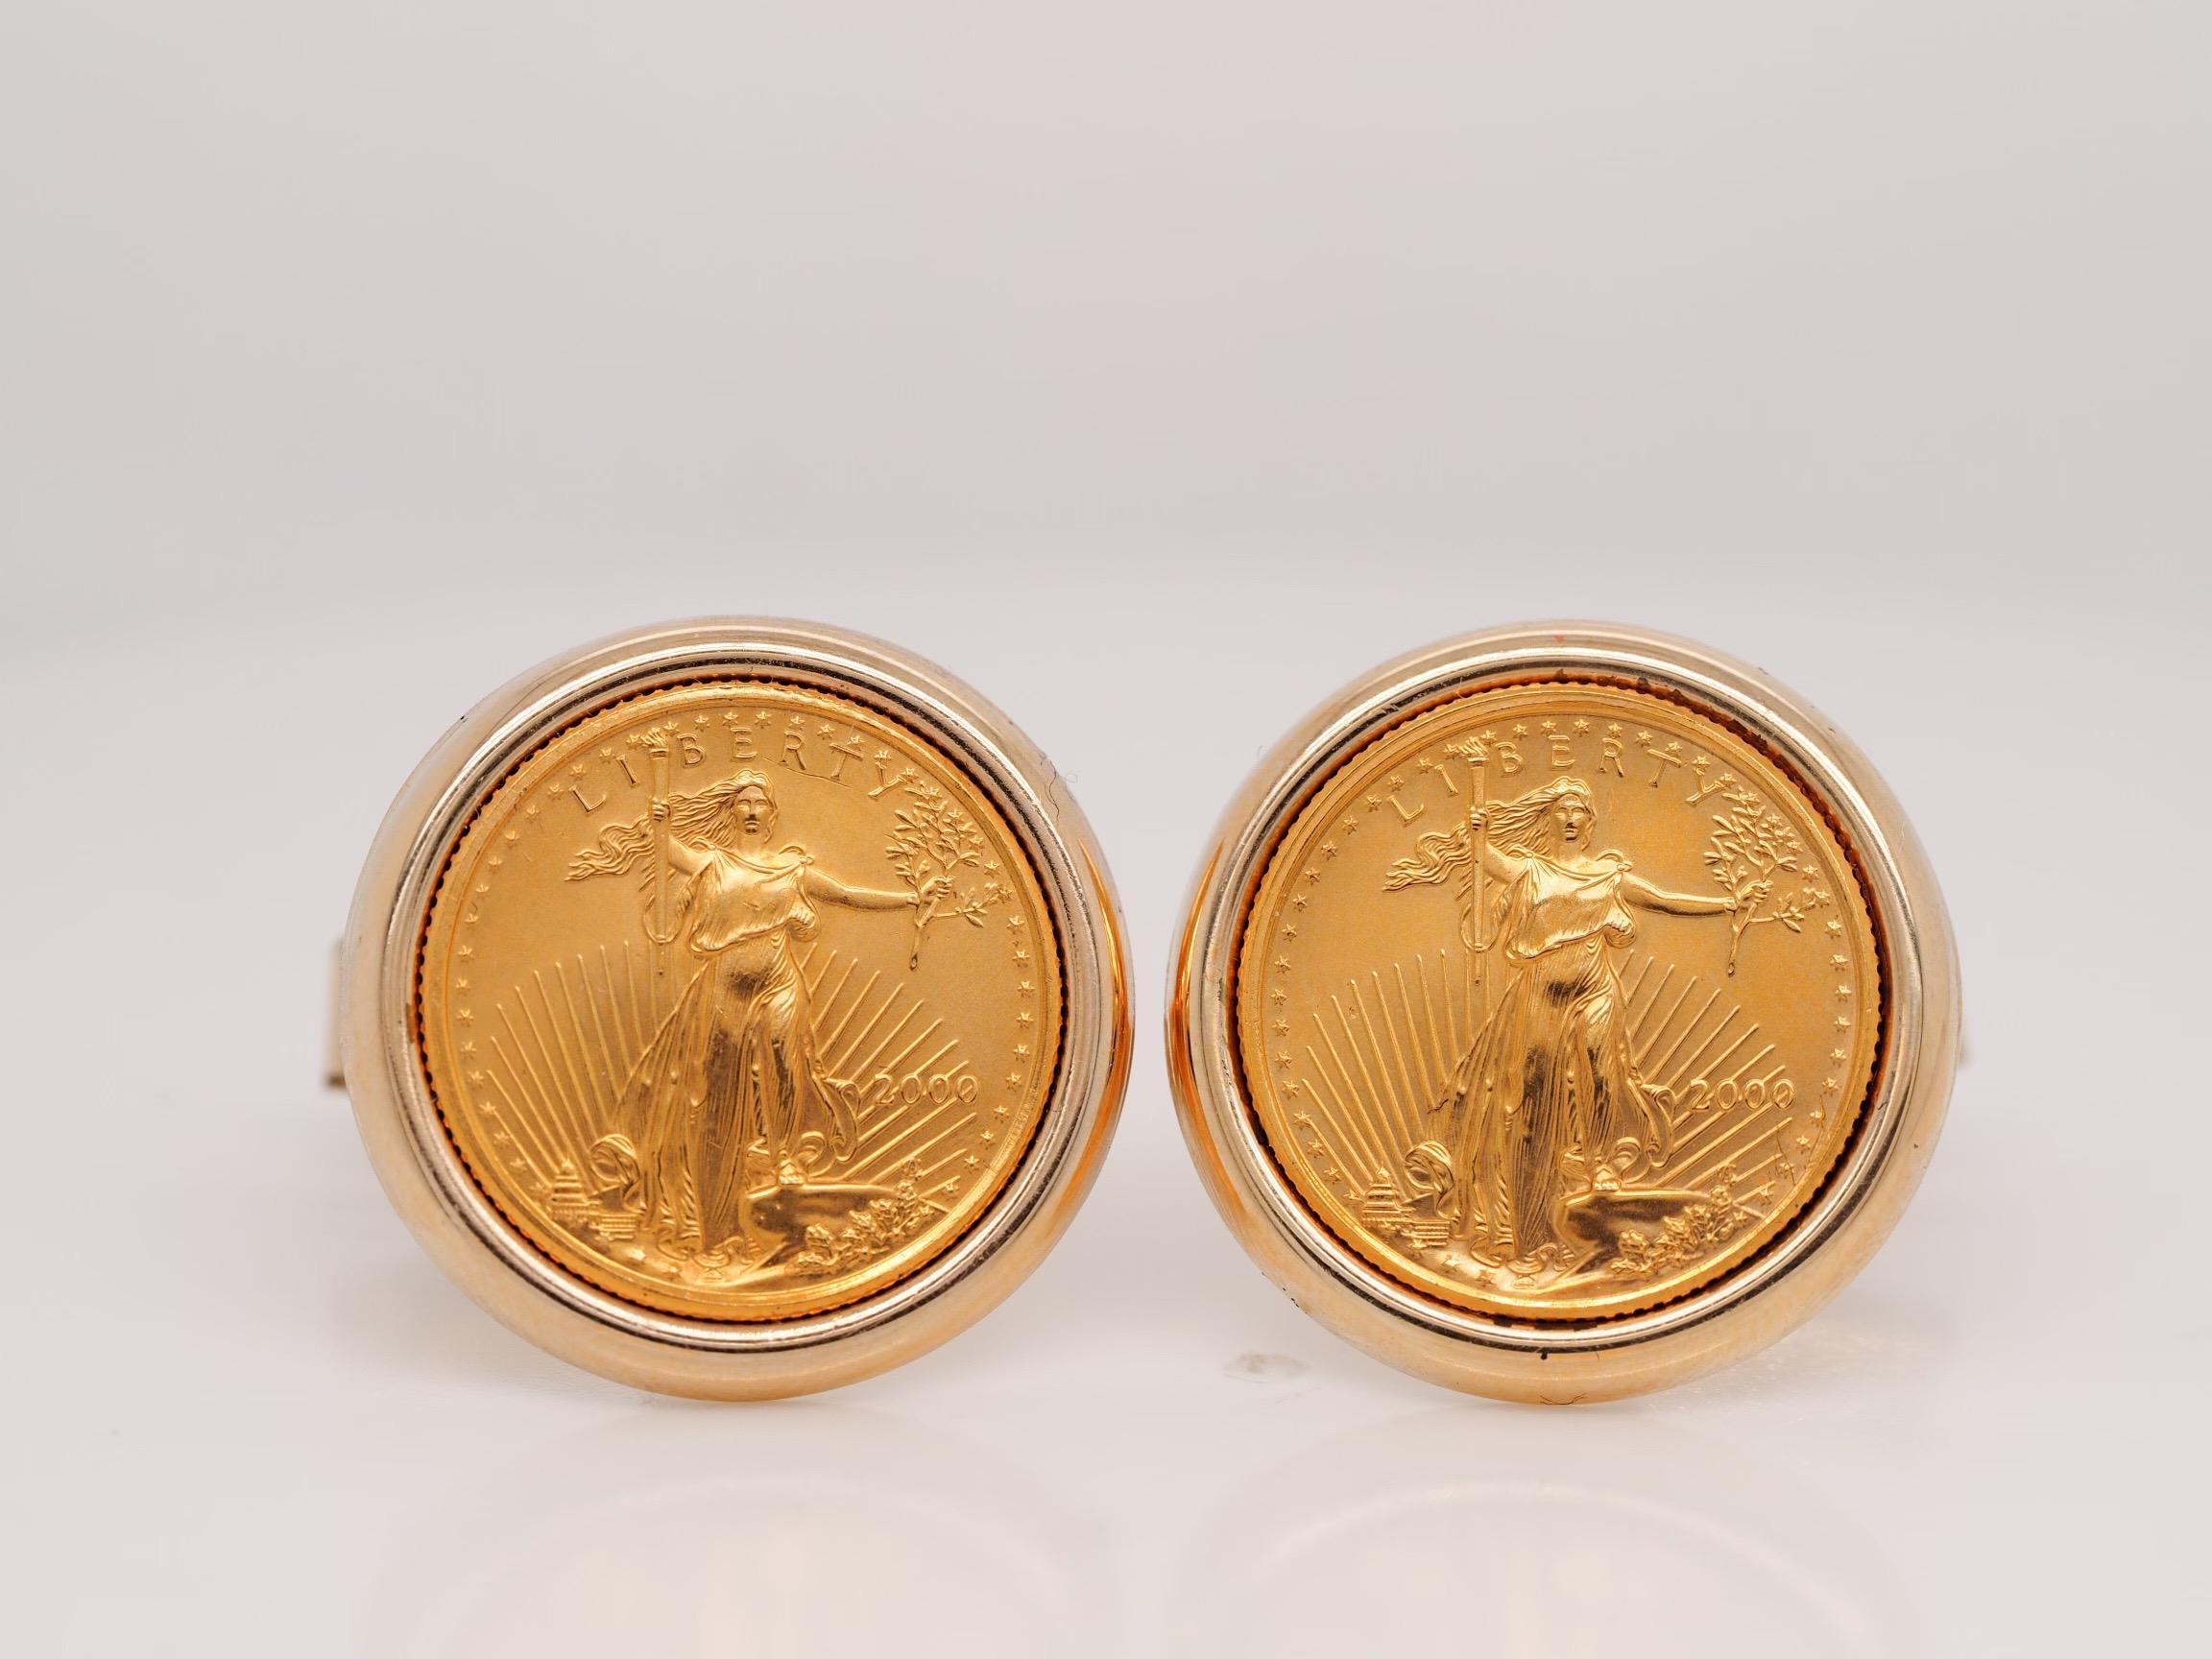 These cufflinks are a perfect statement piece! 

2 Piece set with 1/10 Amercian eagle coins bezel set and framed in 14 karat yellow gold setting


Metal: 14K Yellow Gold

Stamps: 14K

Weight: 13.5 grams 

Size: 20.5mm

Condition: In excellent